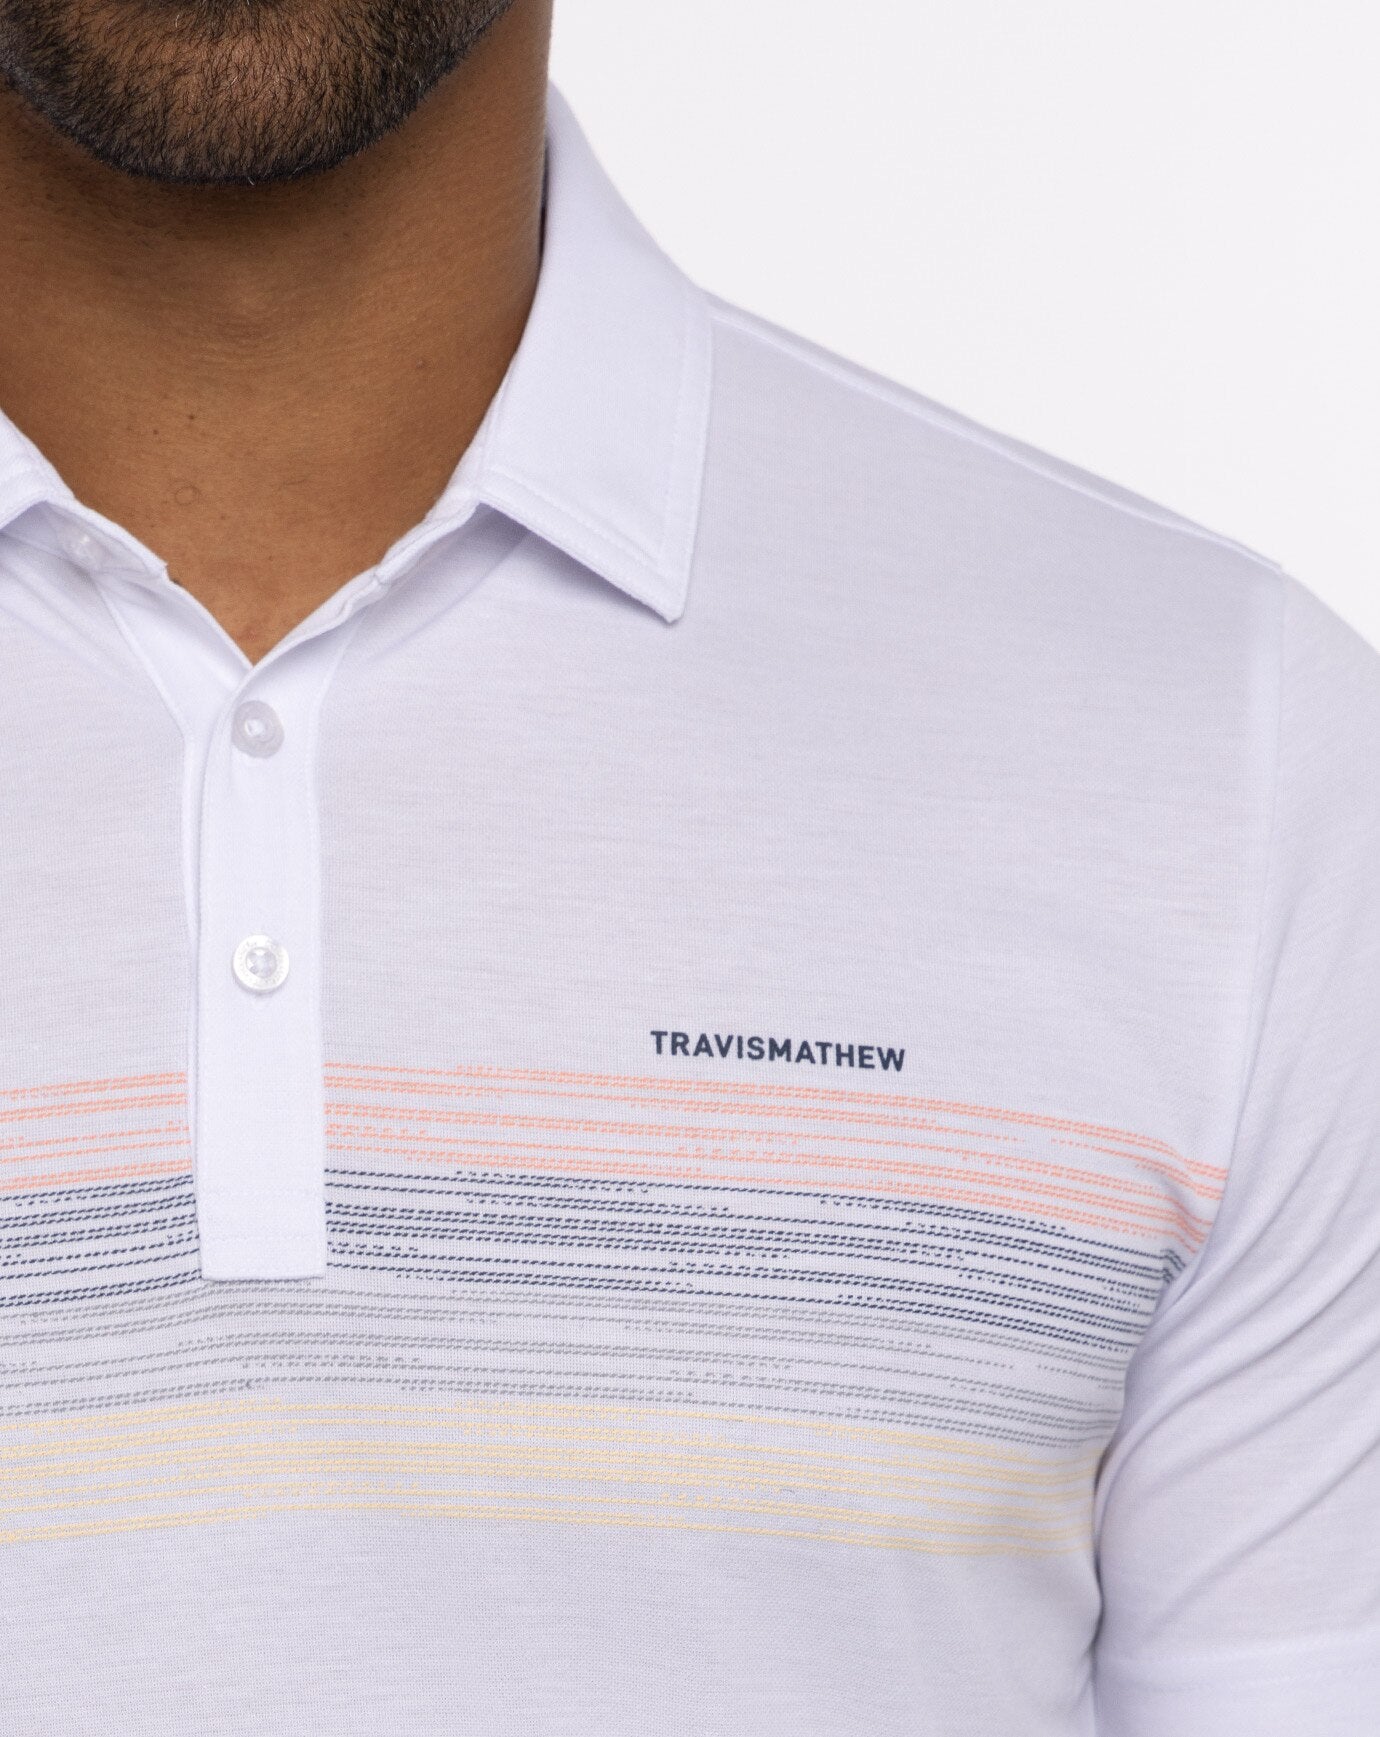 The Travis Mathew BEACH READ Polo is made with premium fabric blends, providing lasting style, performance and comfort for any occasion. 